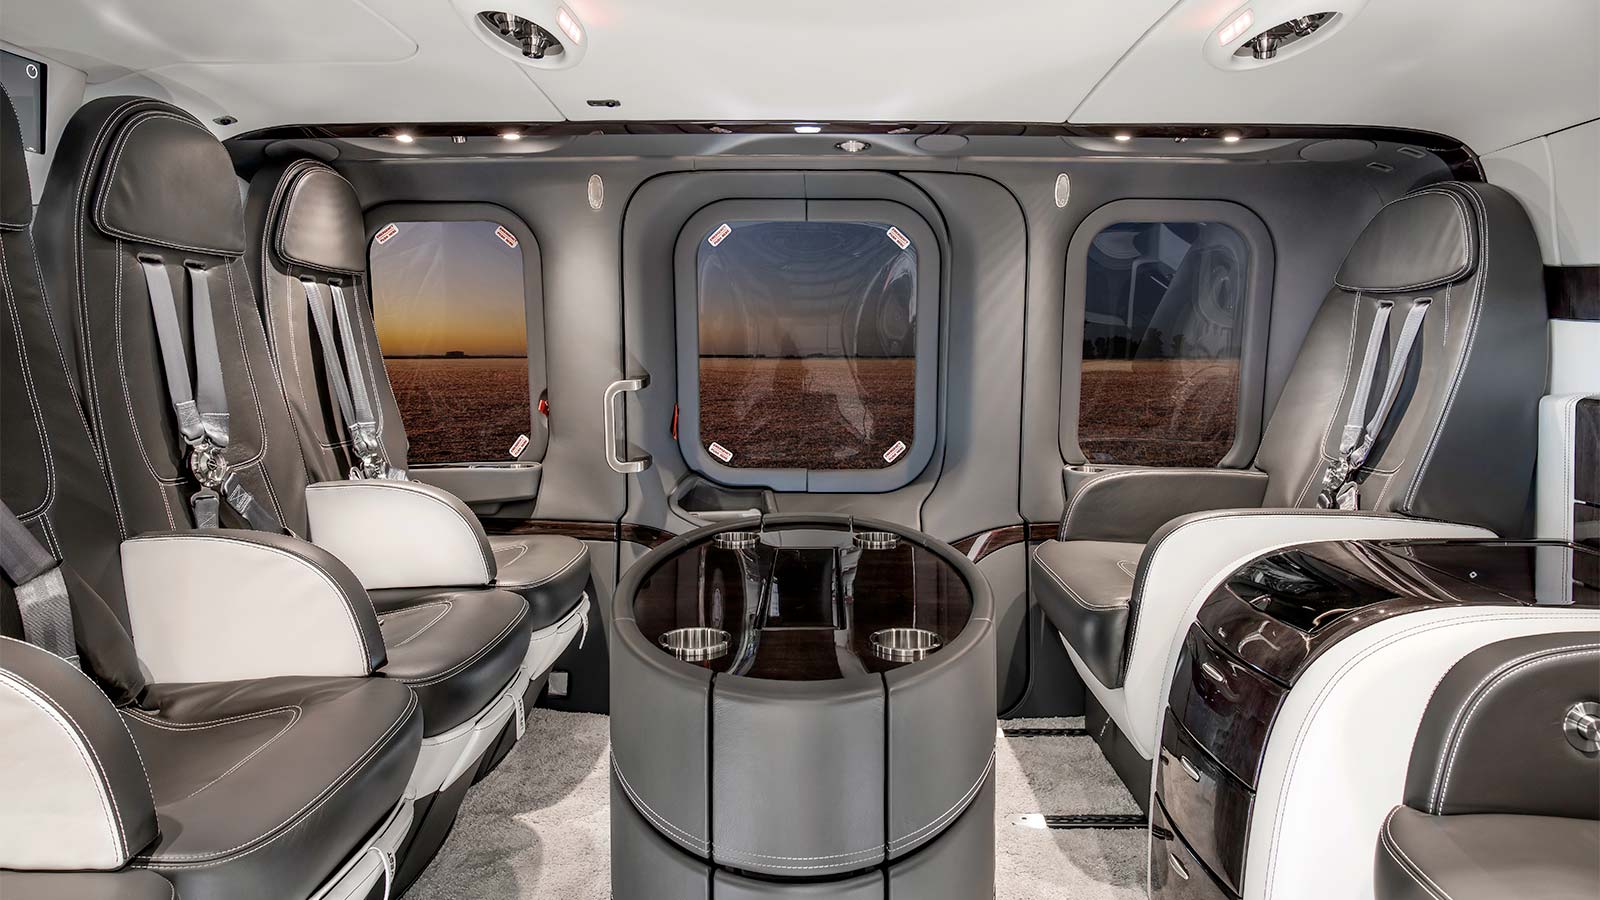 luxury private helicopter